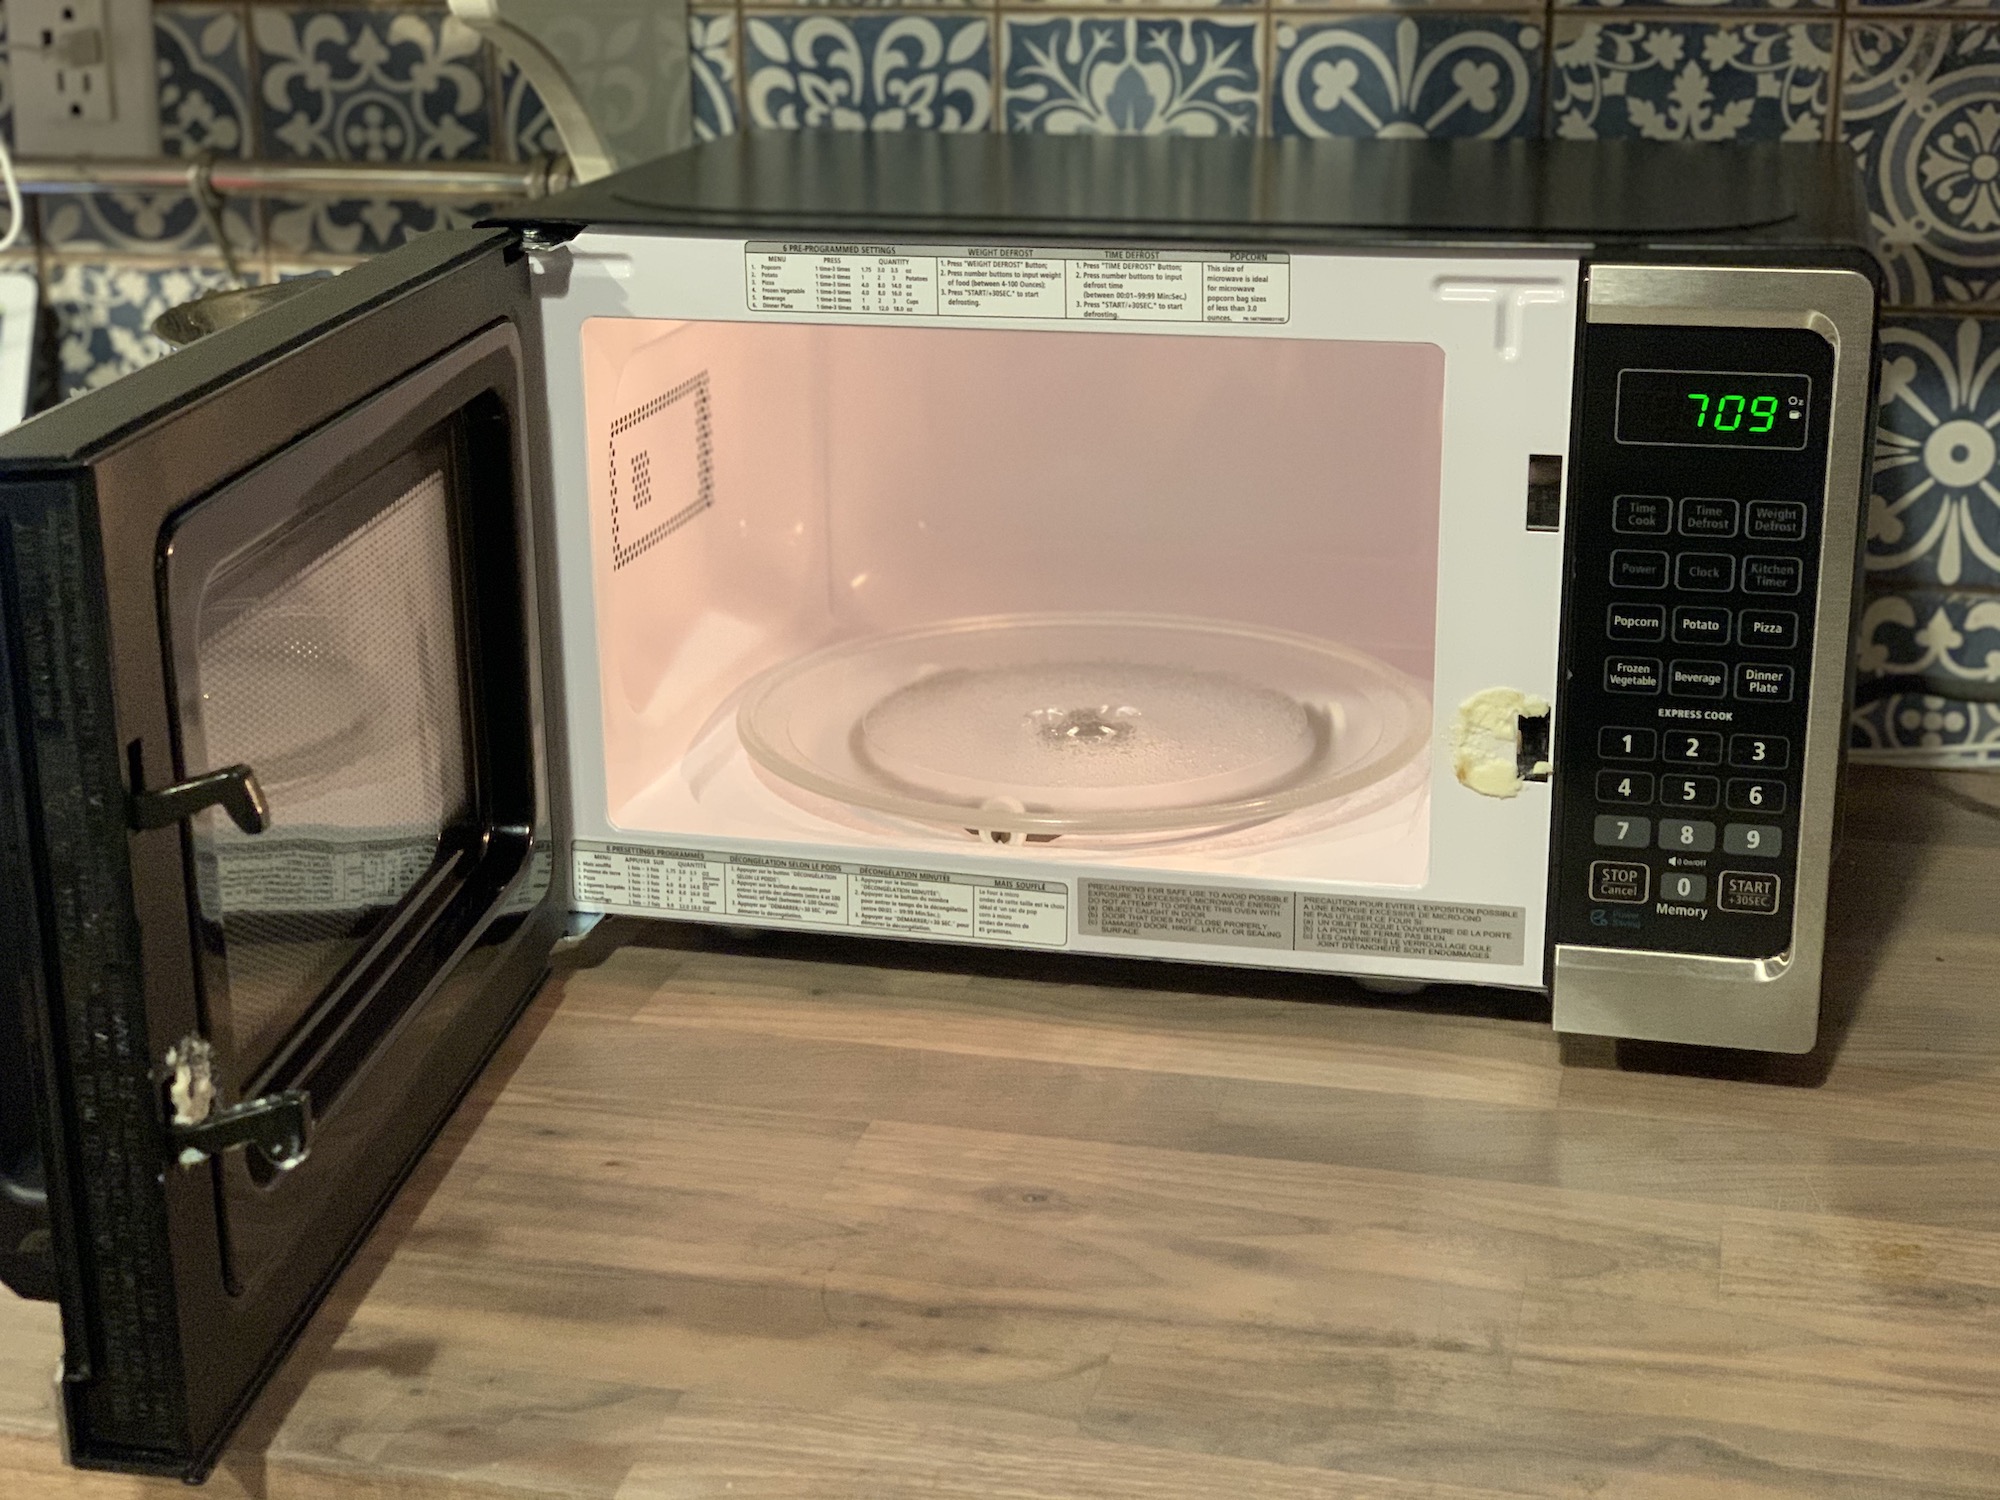 Insignia 0.7 cu.ft. microwave review